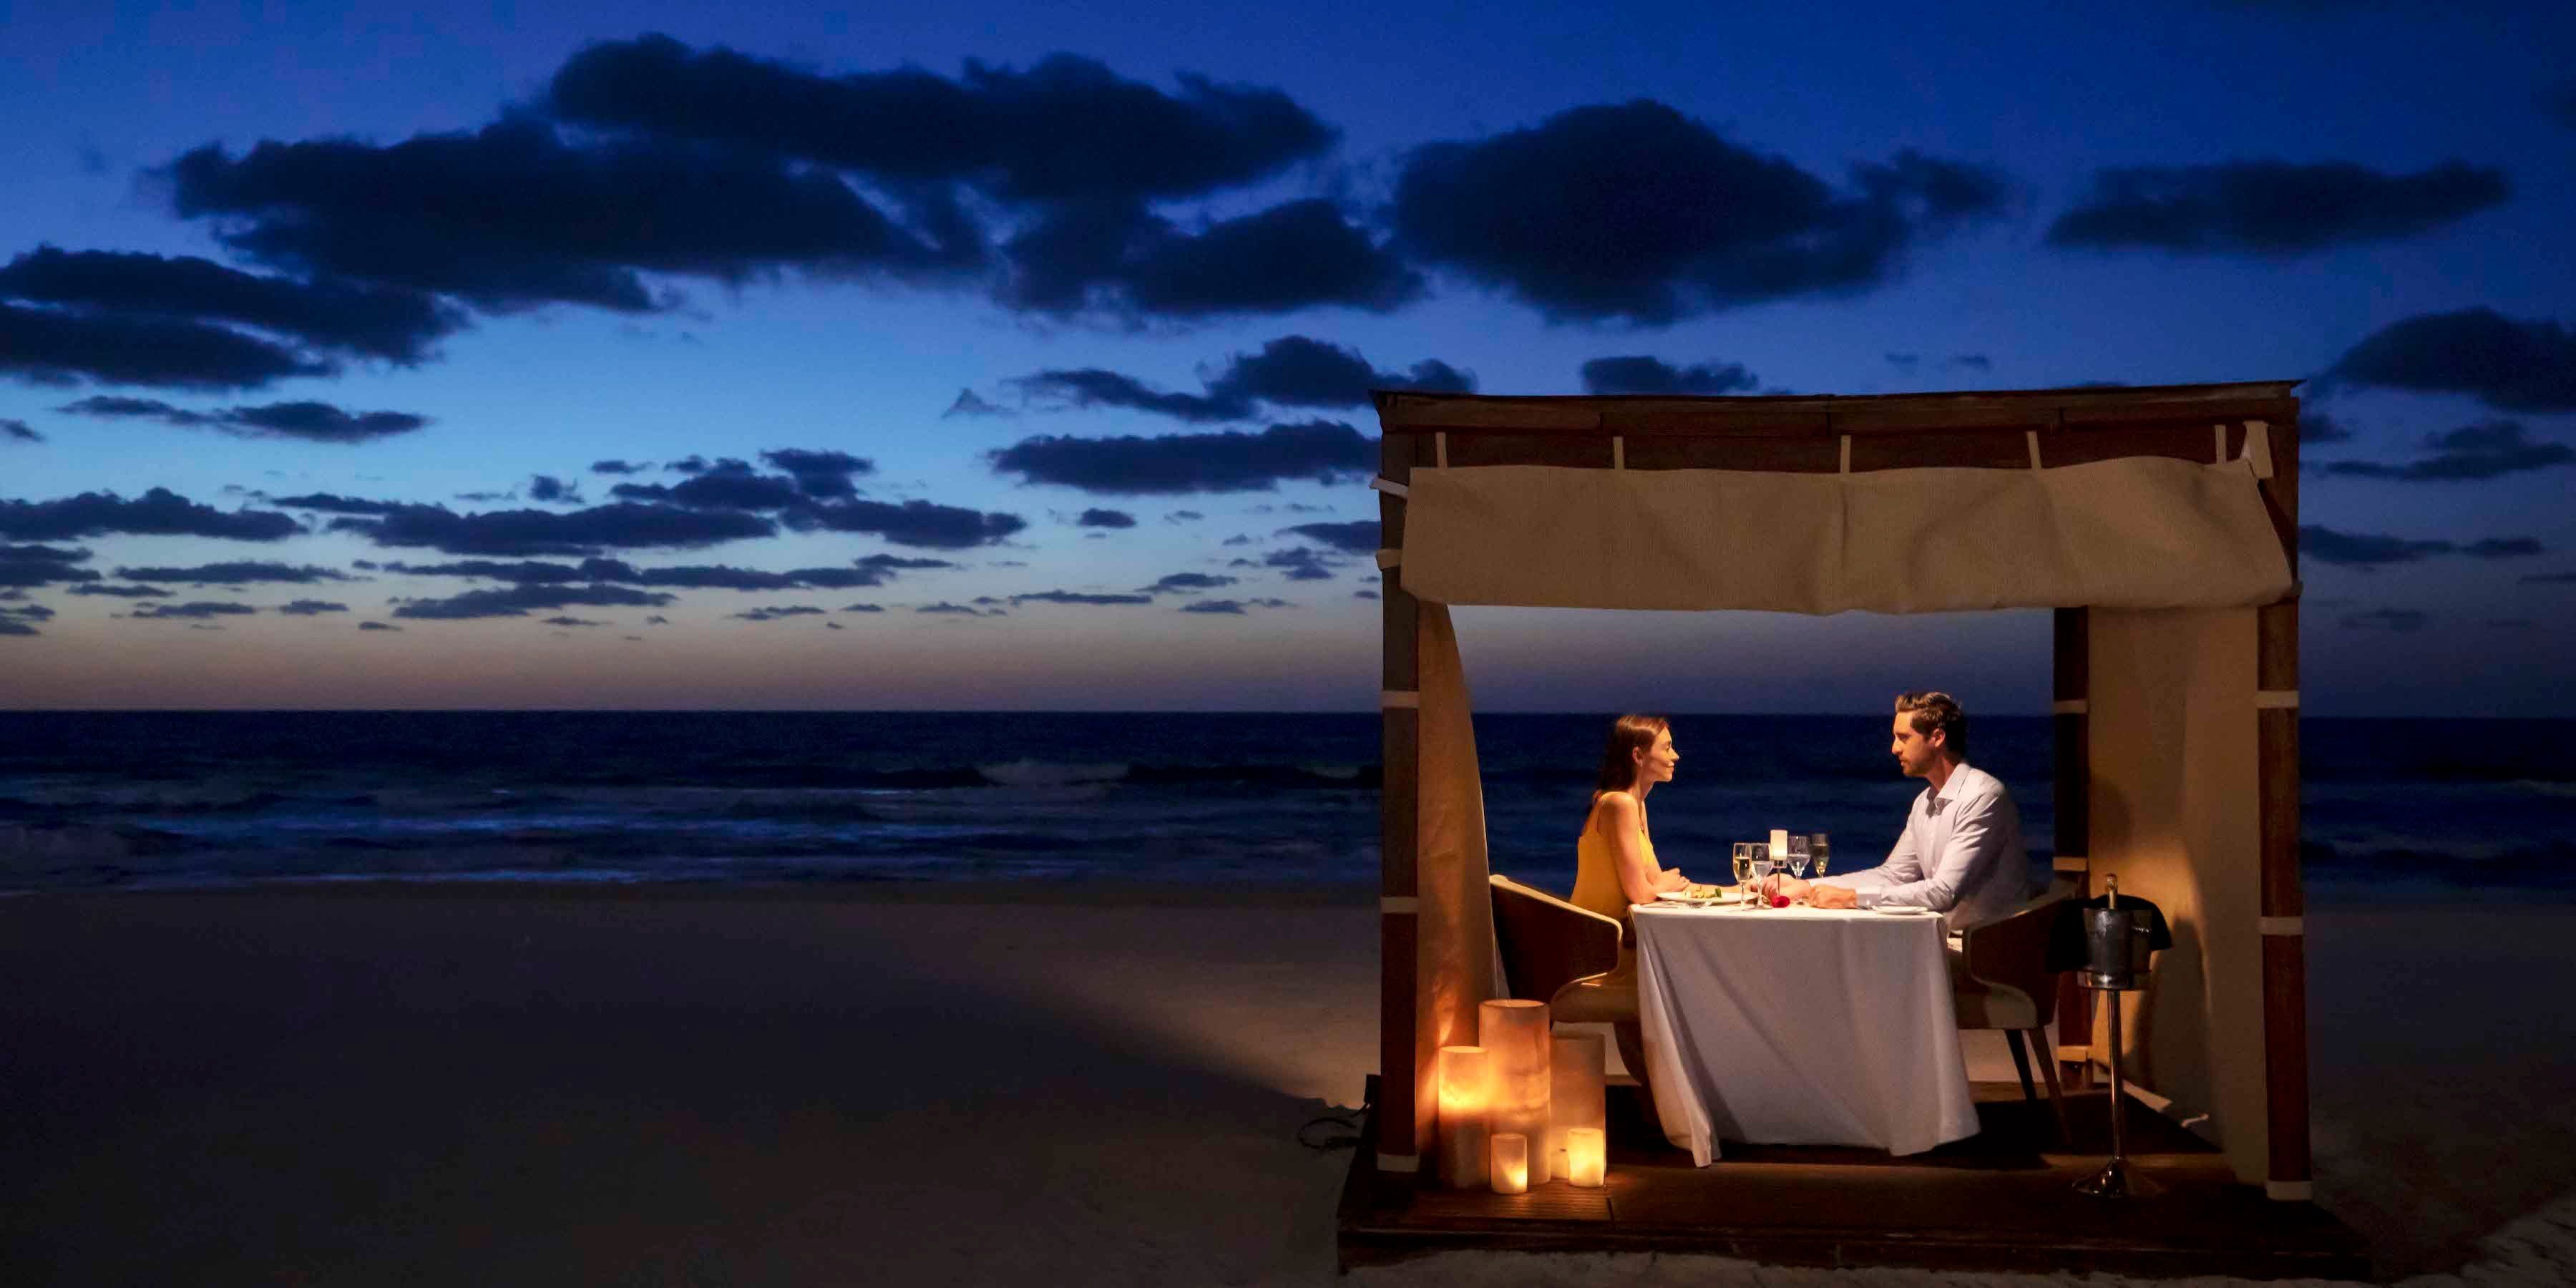 Private dinners under starlight